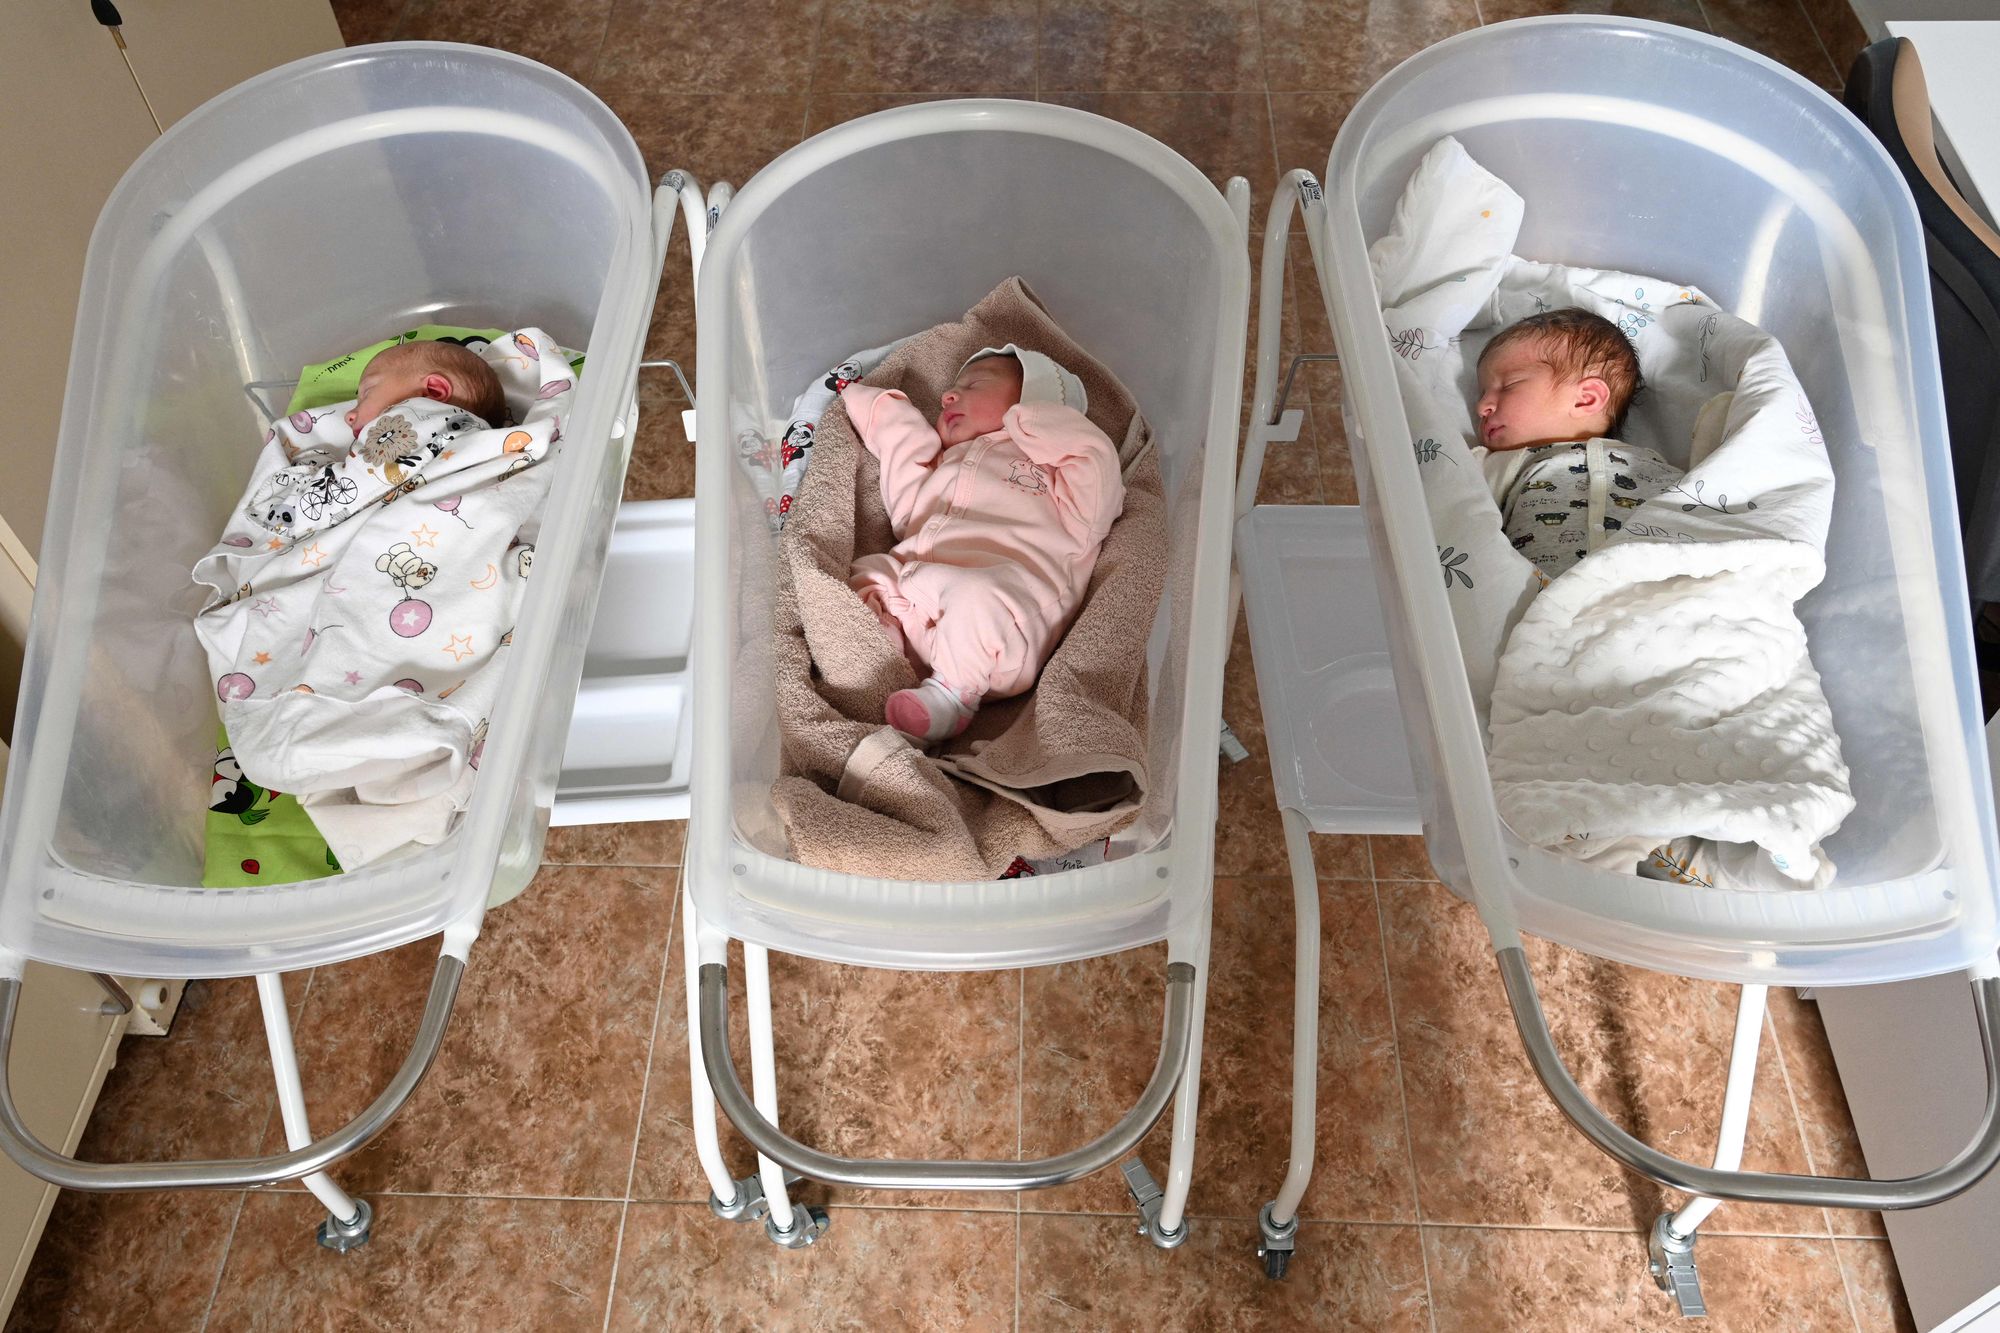 Ukraine's birth rate drops by 28%